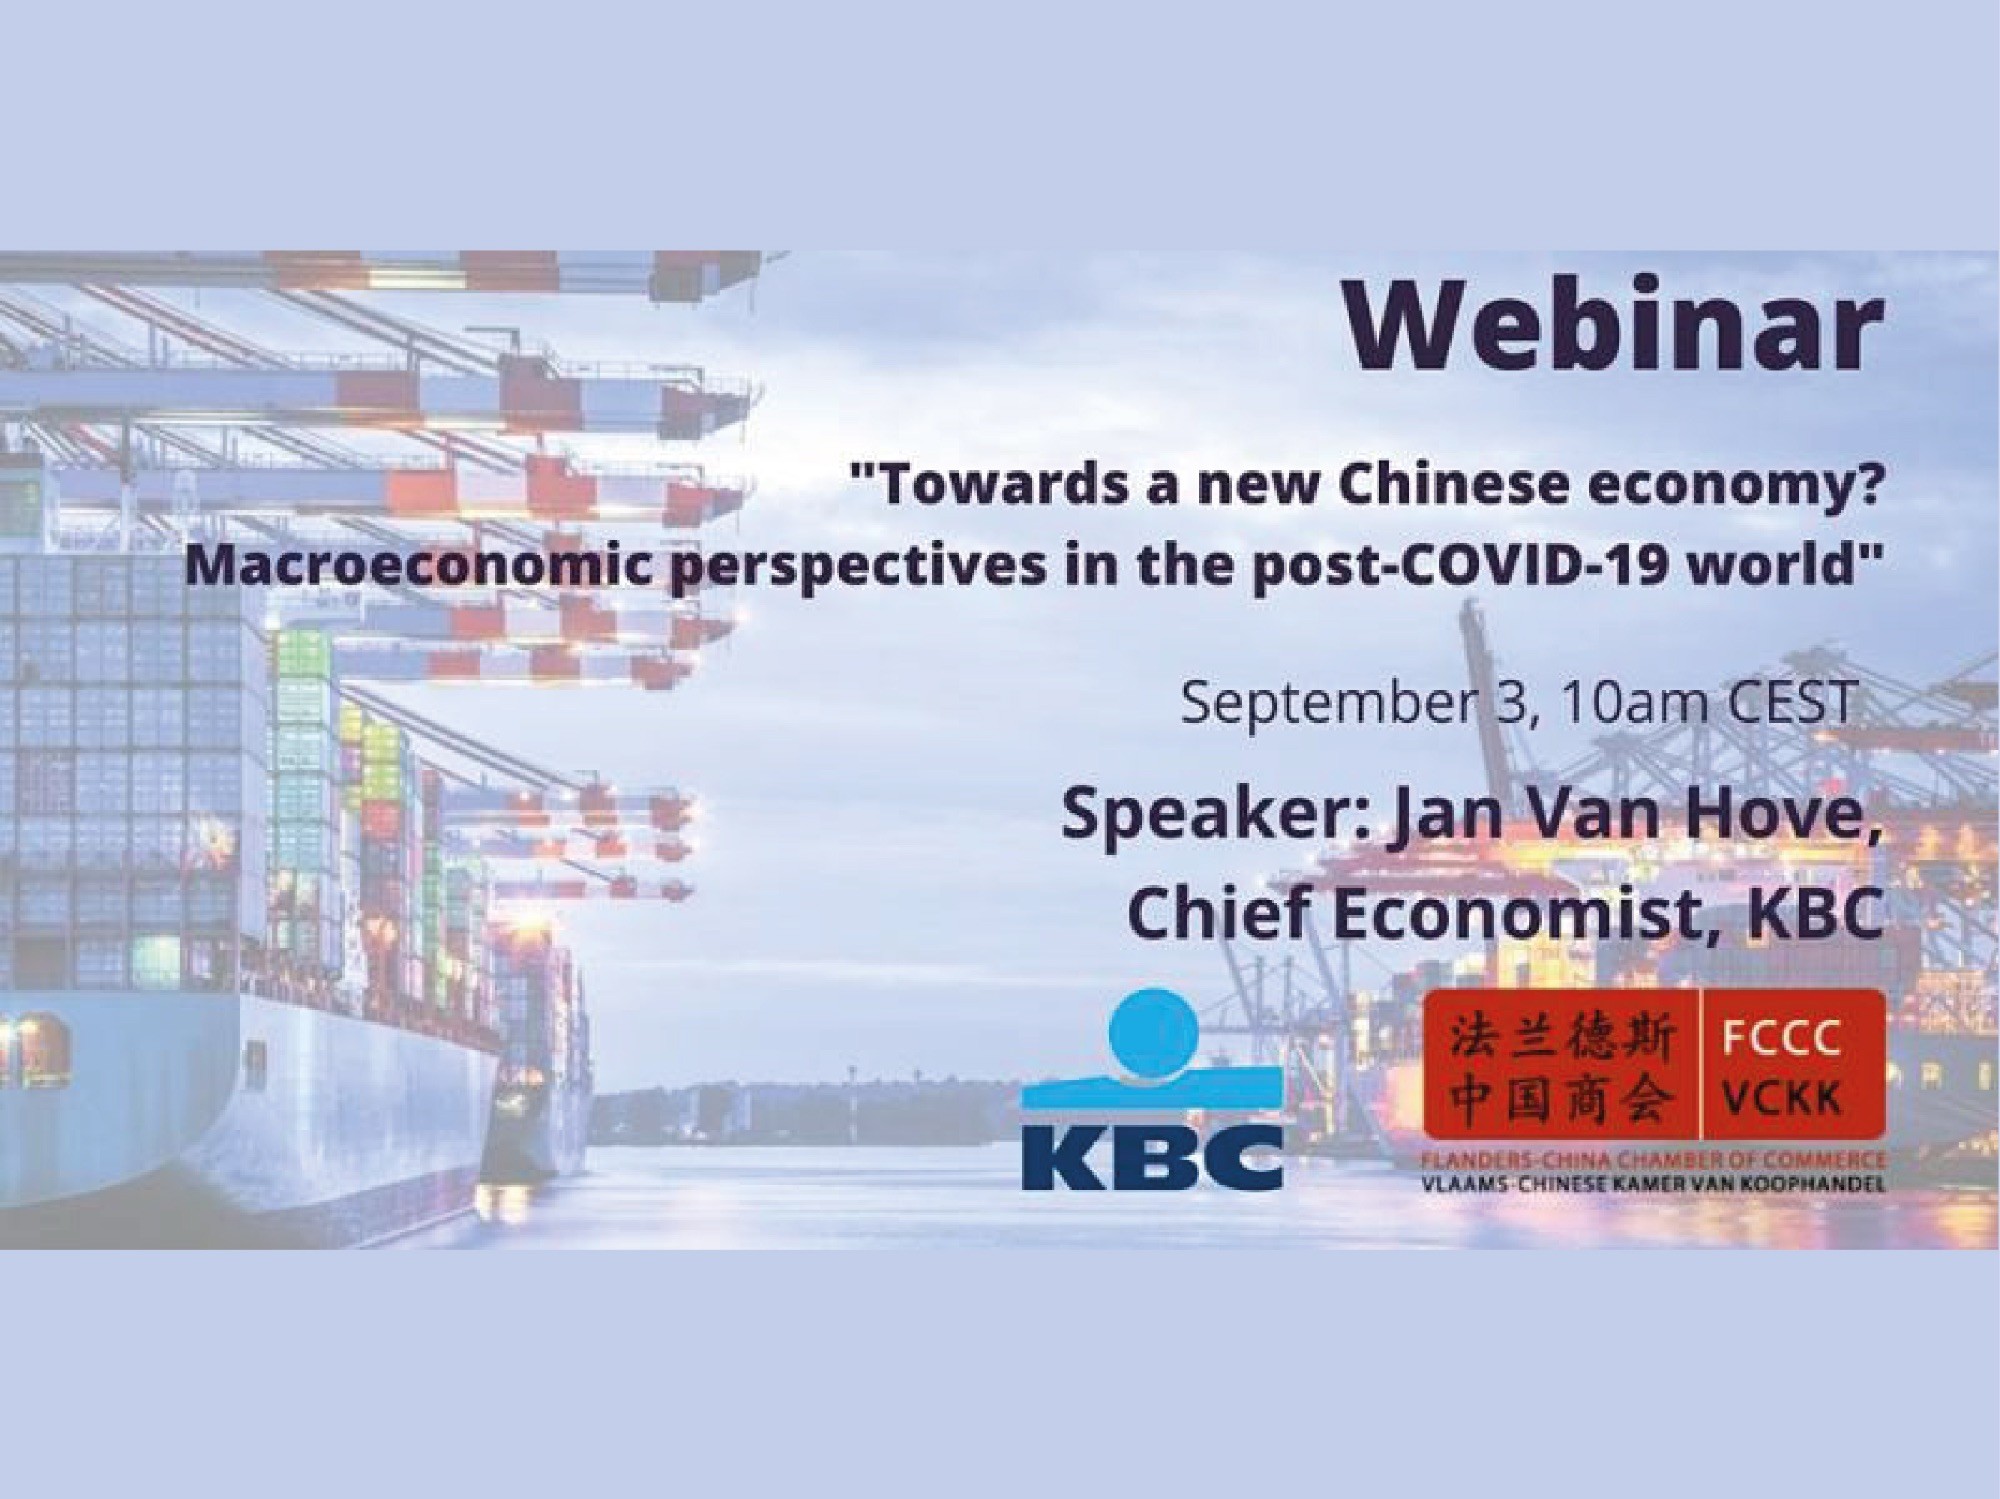 Webinar: Towards a new Chinese economy? Macroeconomic perspectives in the post-COVID-19 world